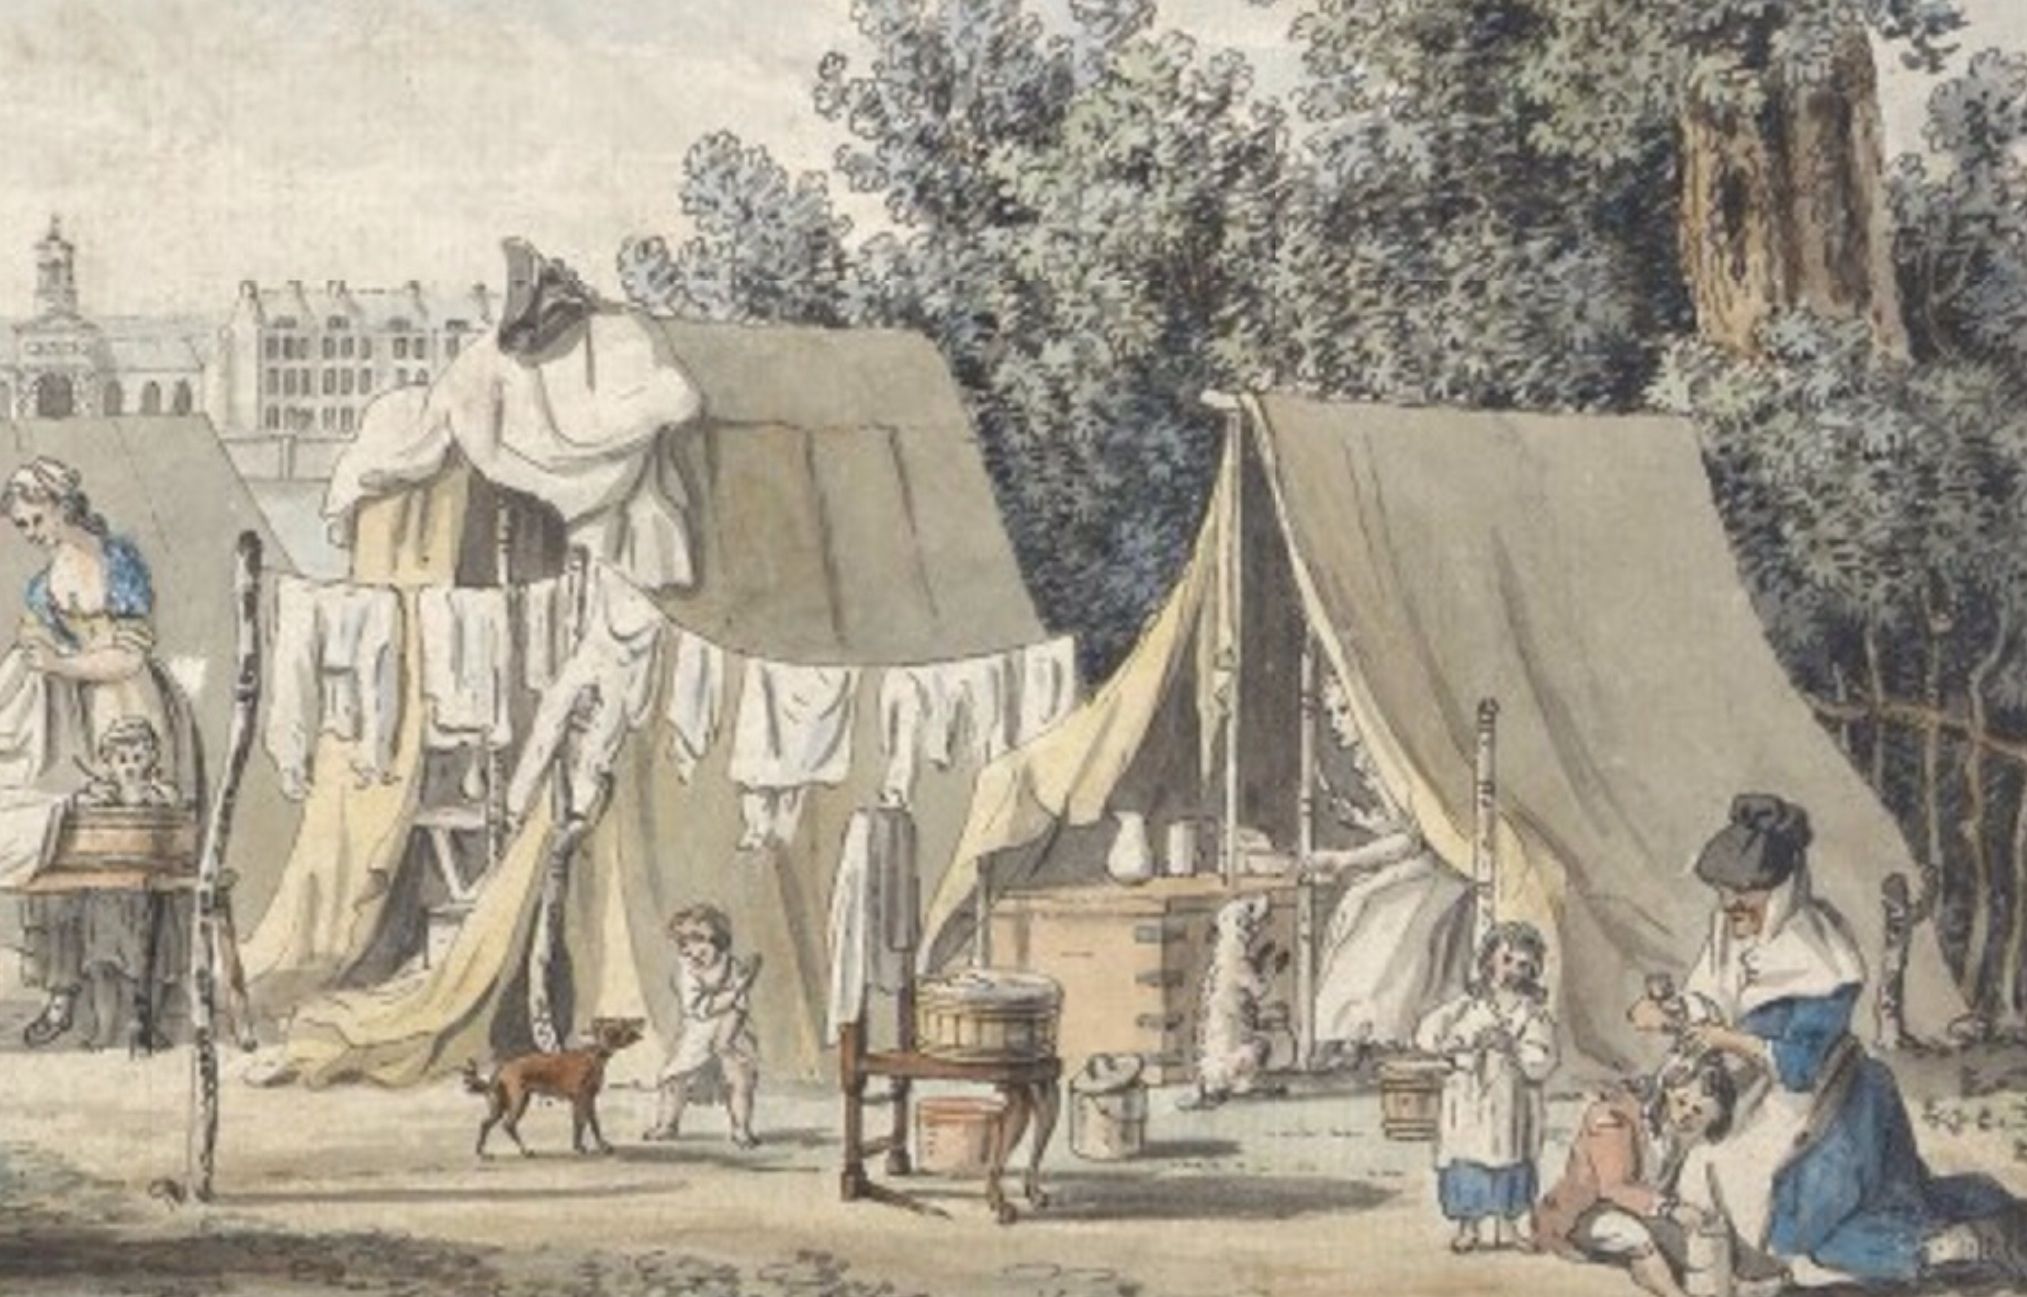 British military encampment circa 1785. A busy camp with multiple people moving between rows of canvas tents. Laundry lines are strung between tents.